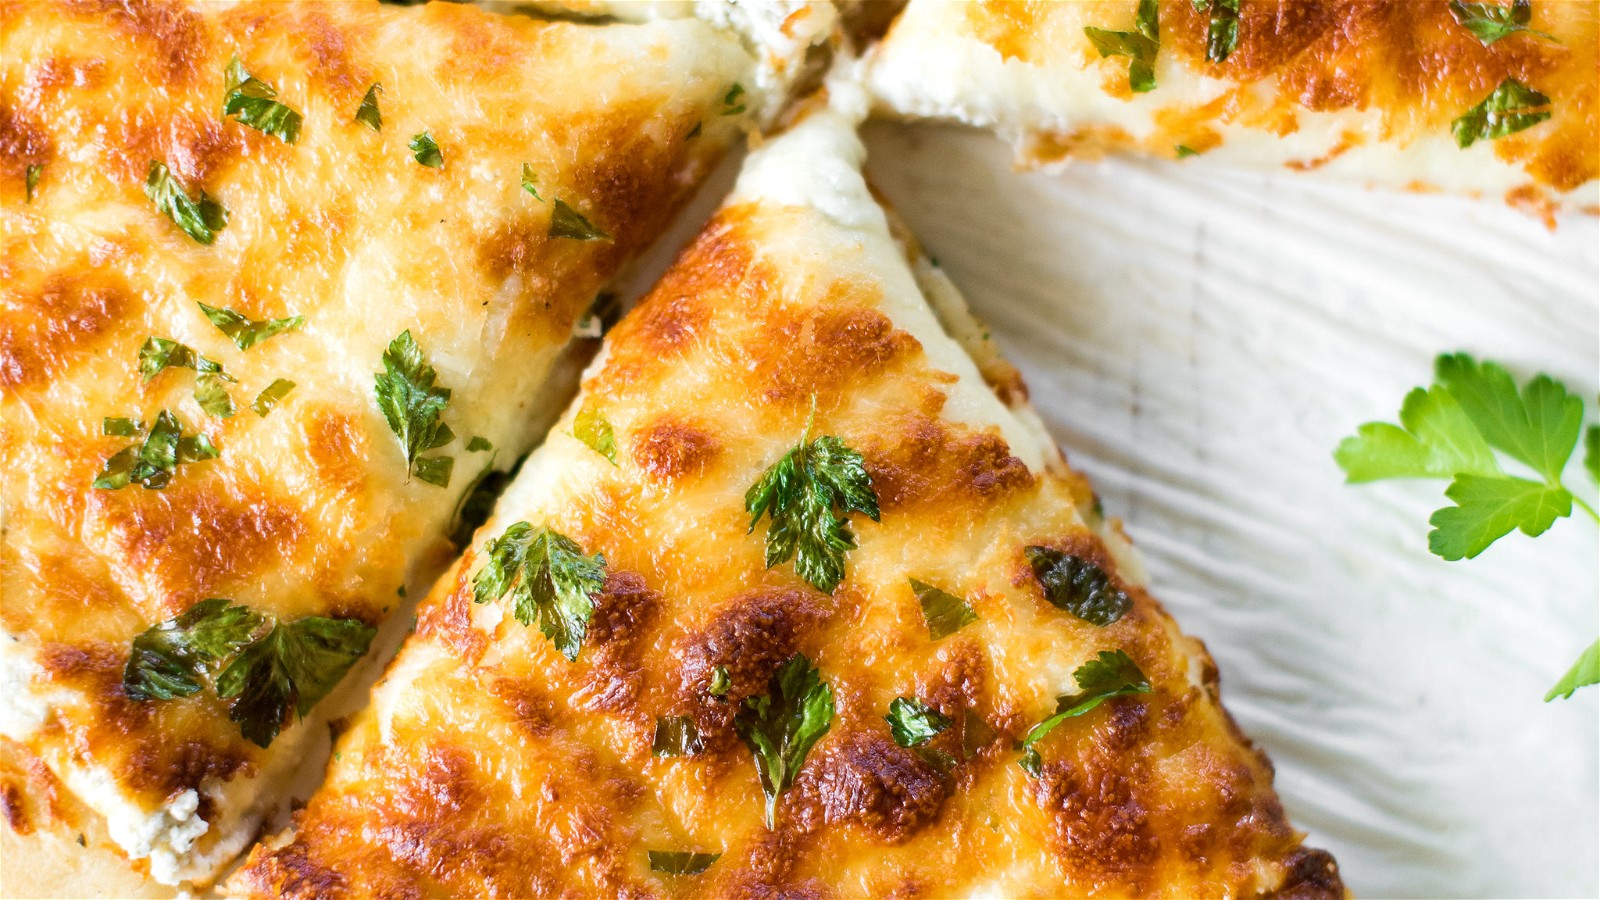 Image of Garlic and Herb Pizza